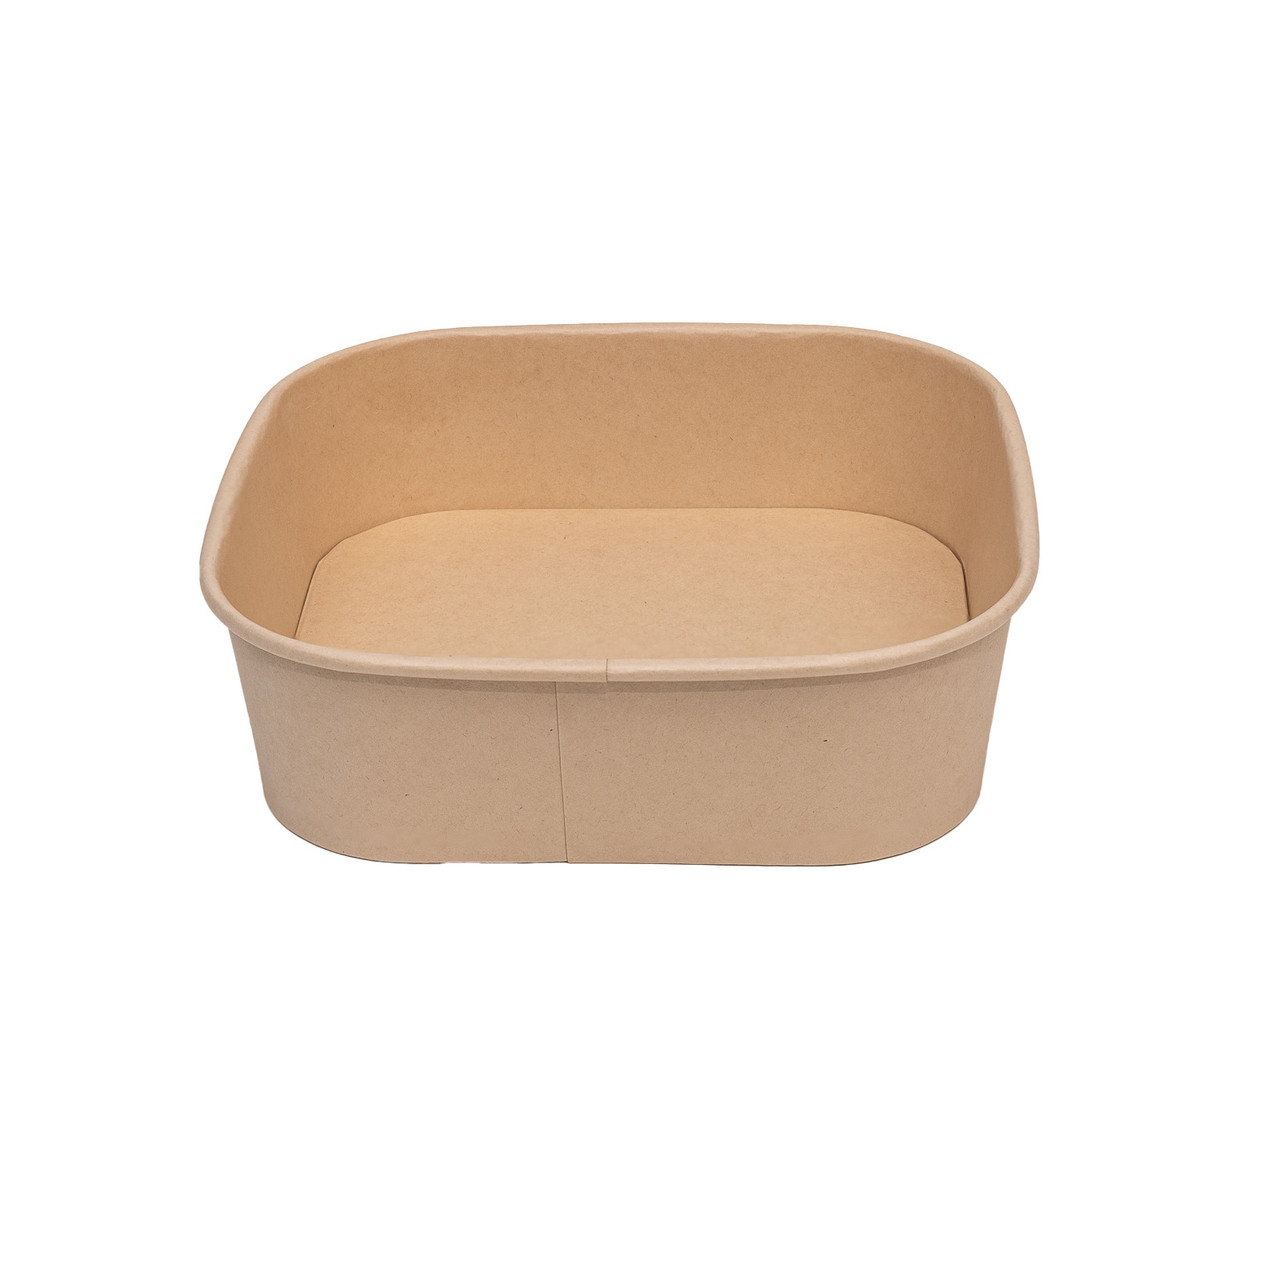 34oz Bamboo Square Takeout Container